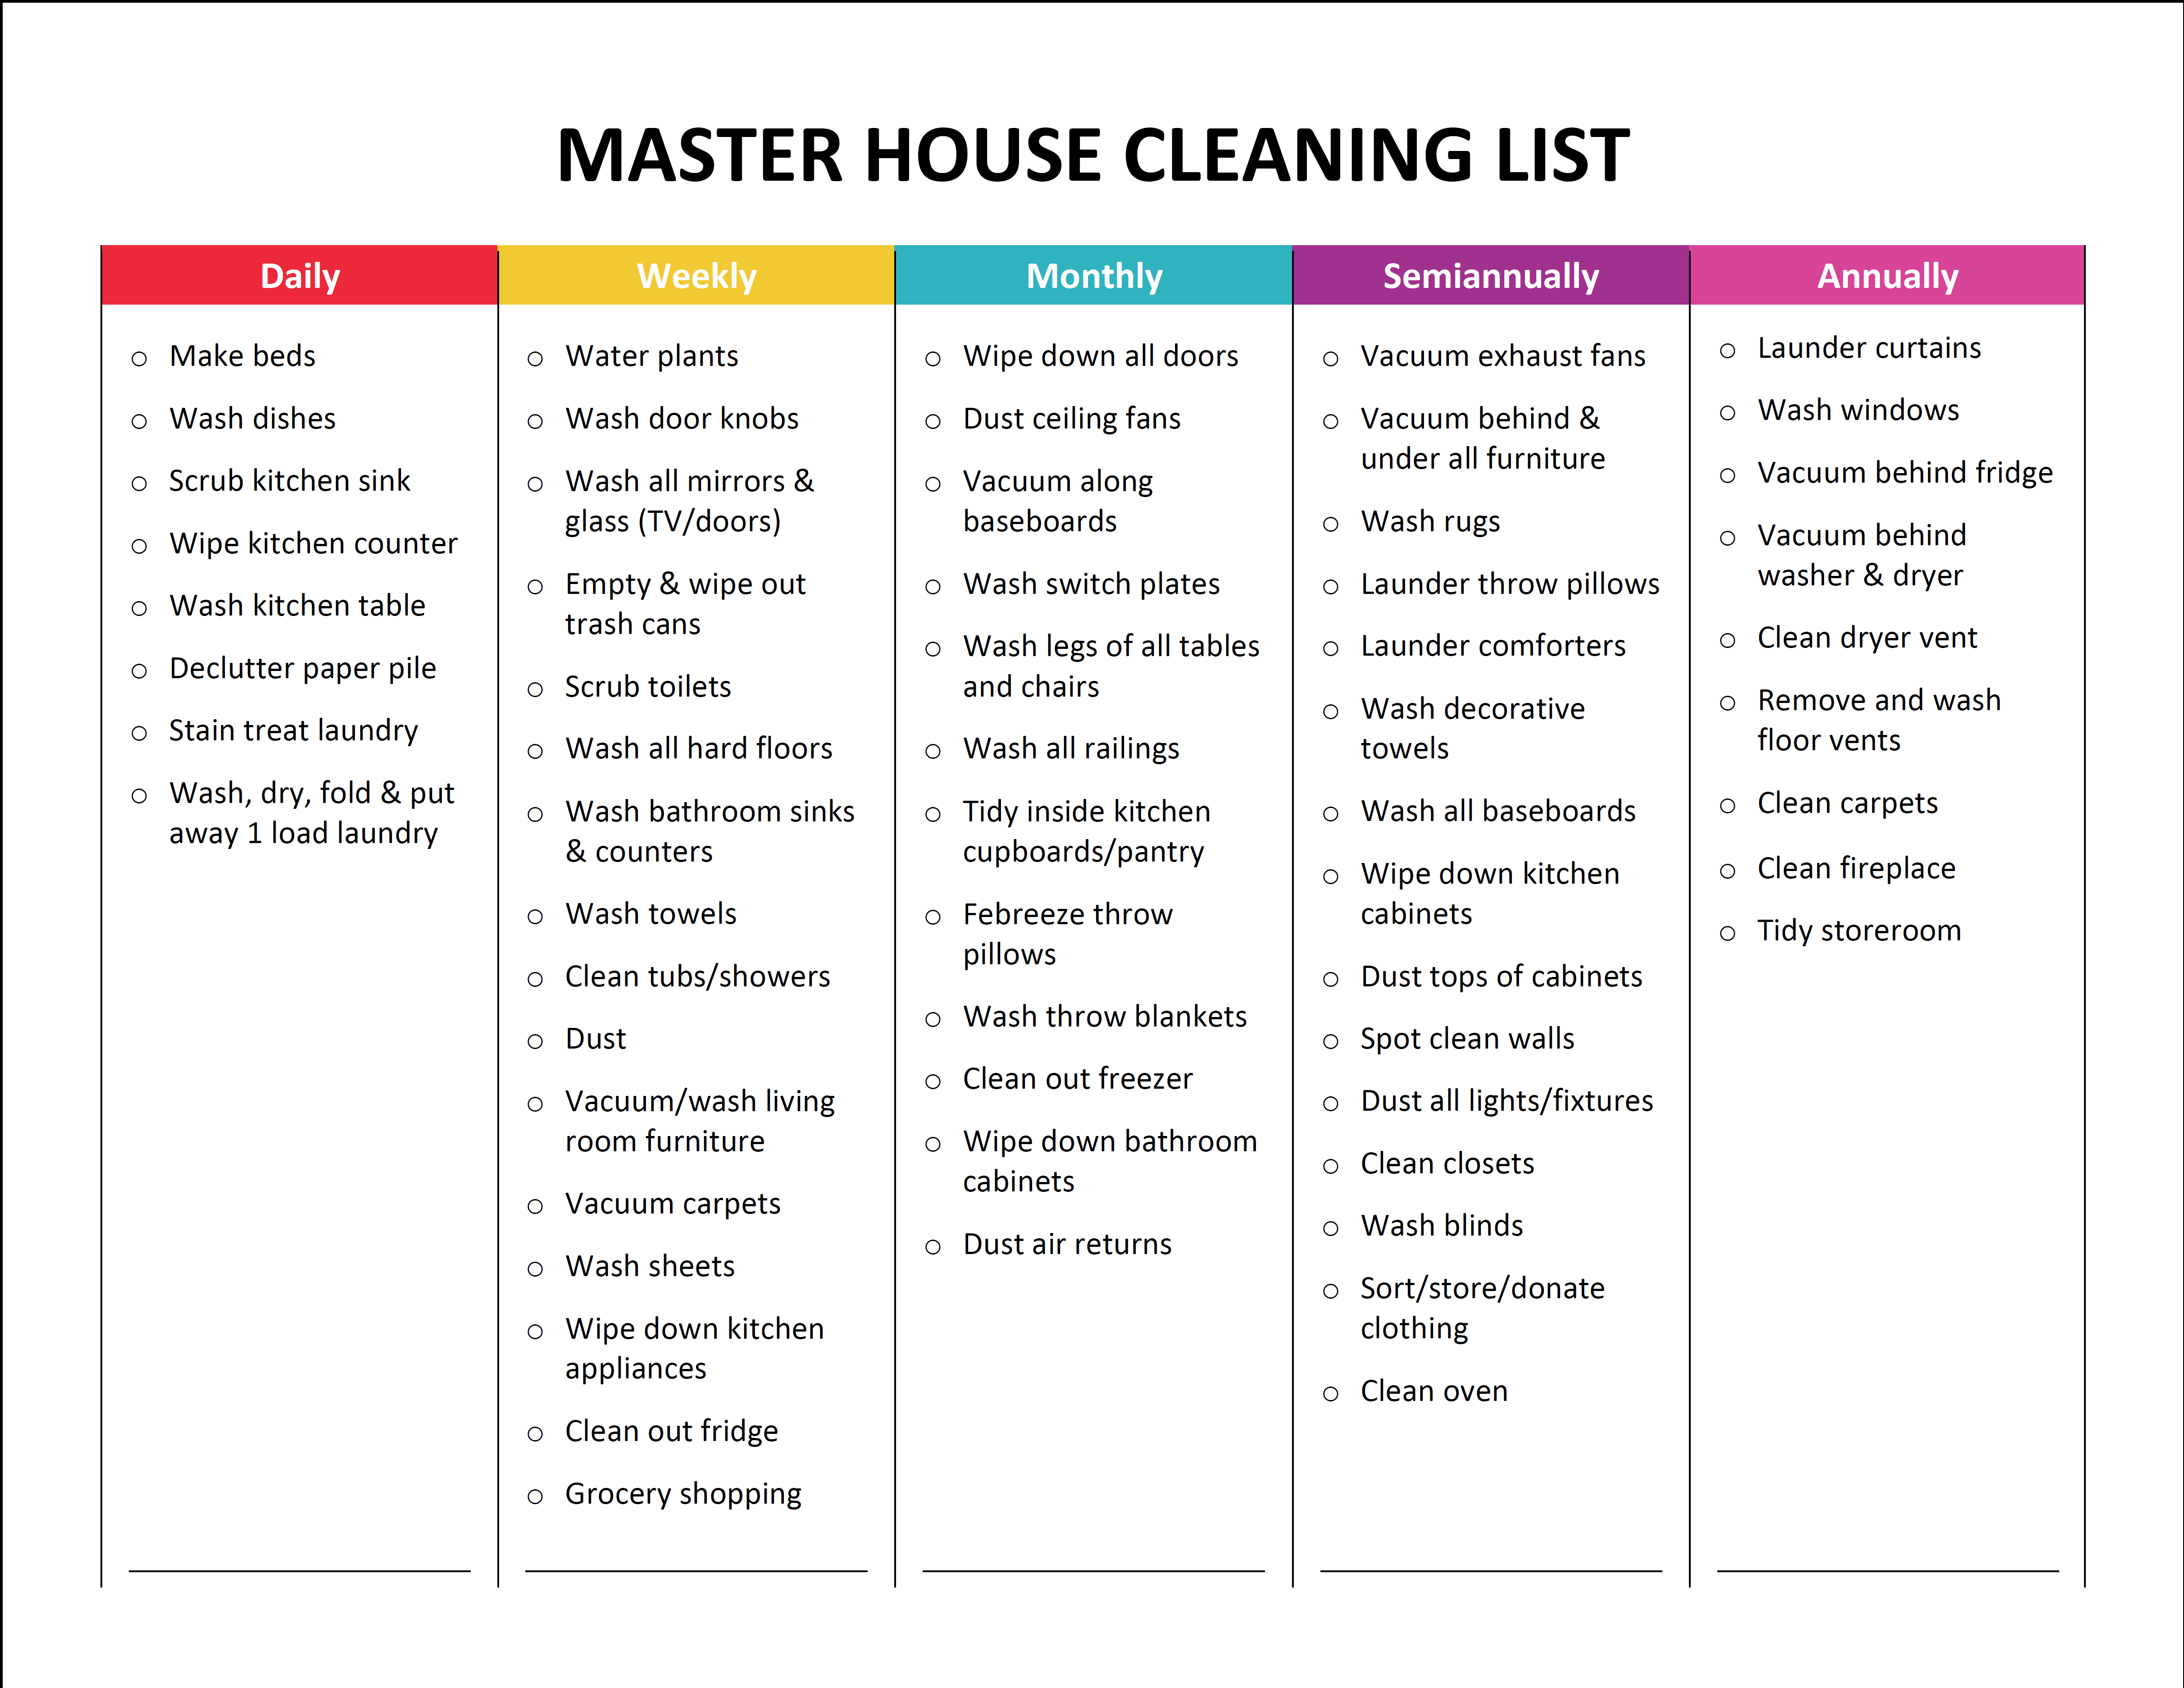 6-best-images-of-printable-master-cleaning-list-template-daily-house-cleaning-schedule